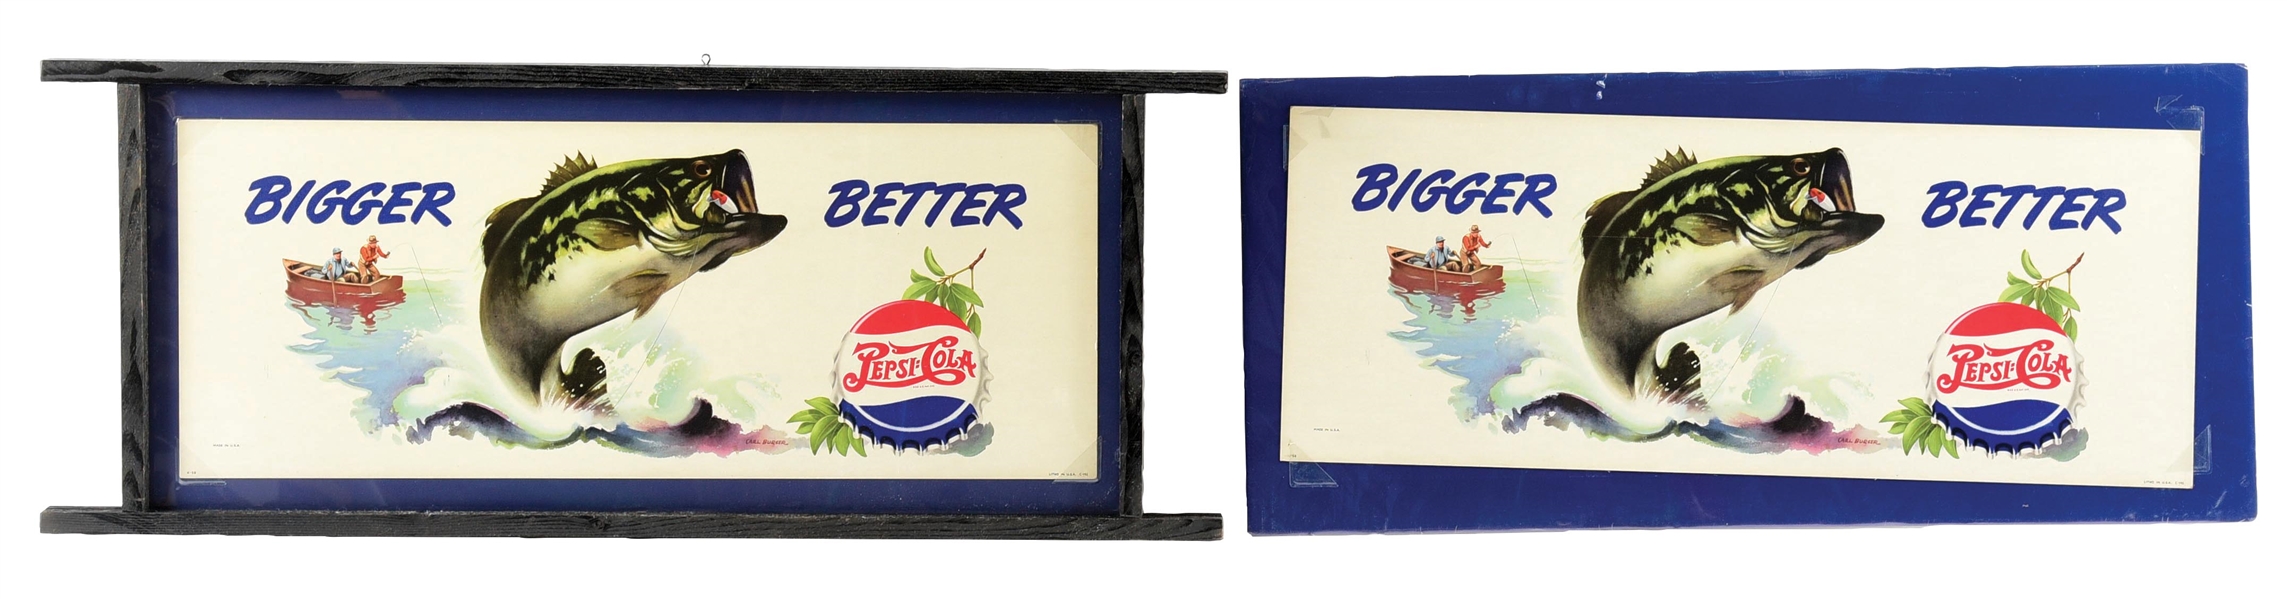 COLLECTION OF 2: PEPSI COLA "BIGGER BETTER" CARD STOCK LITHOGRAPHED ADVERTISEMENTS. 